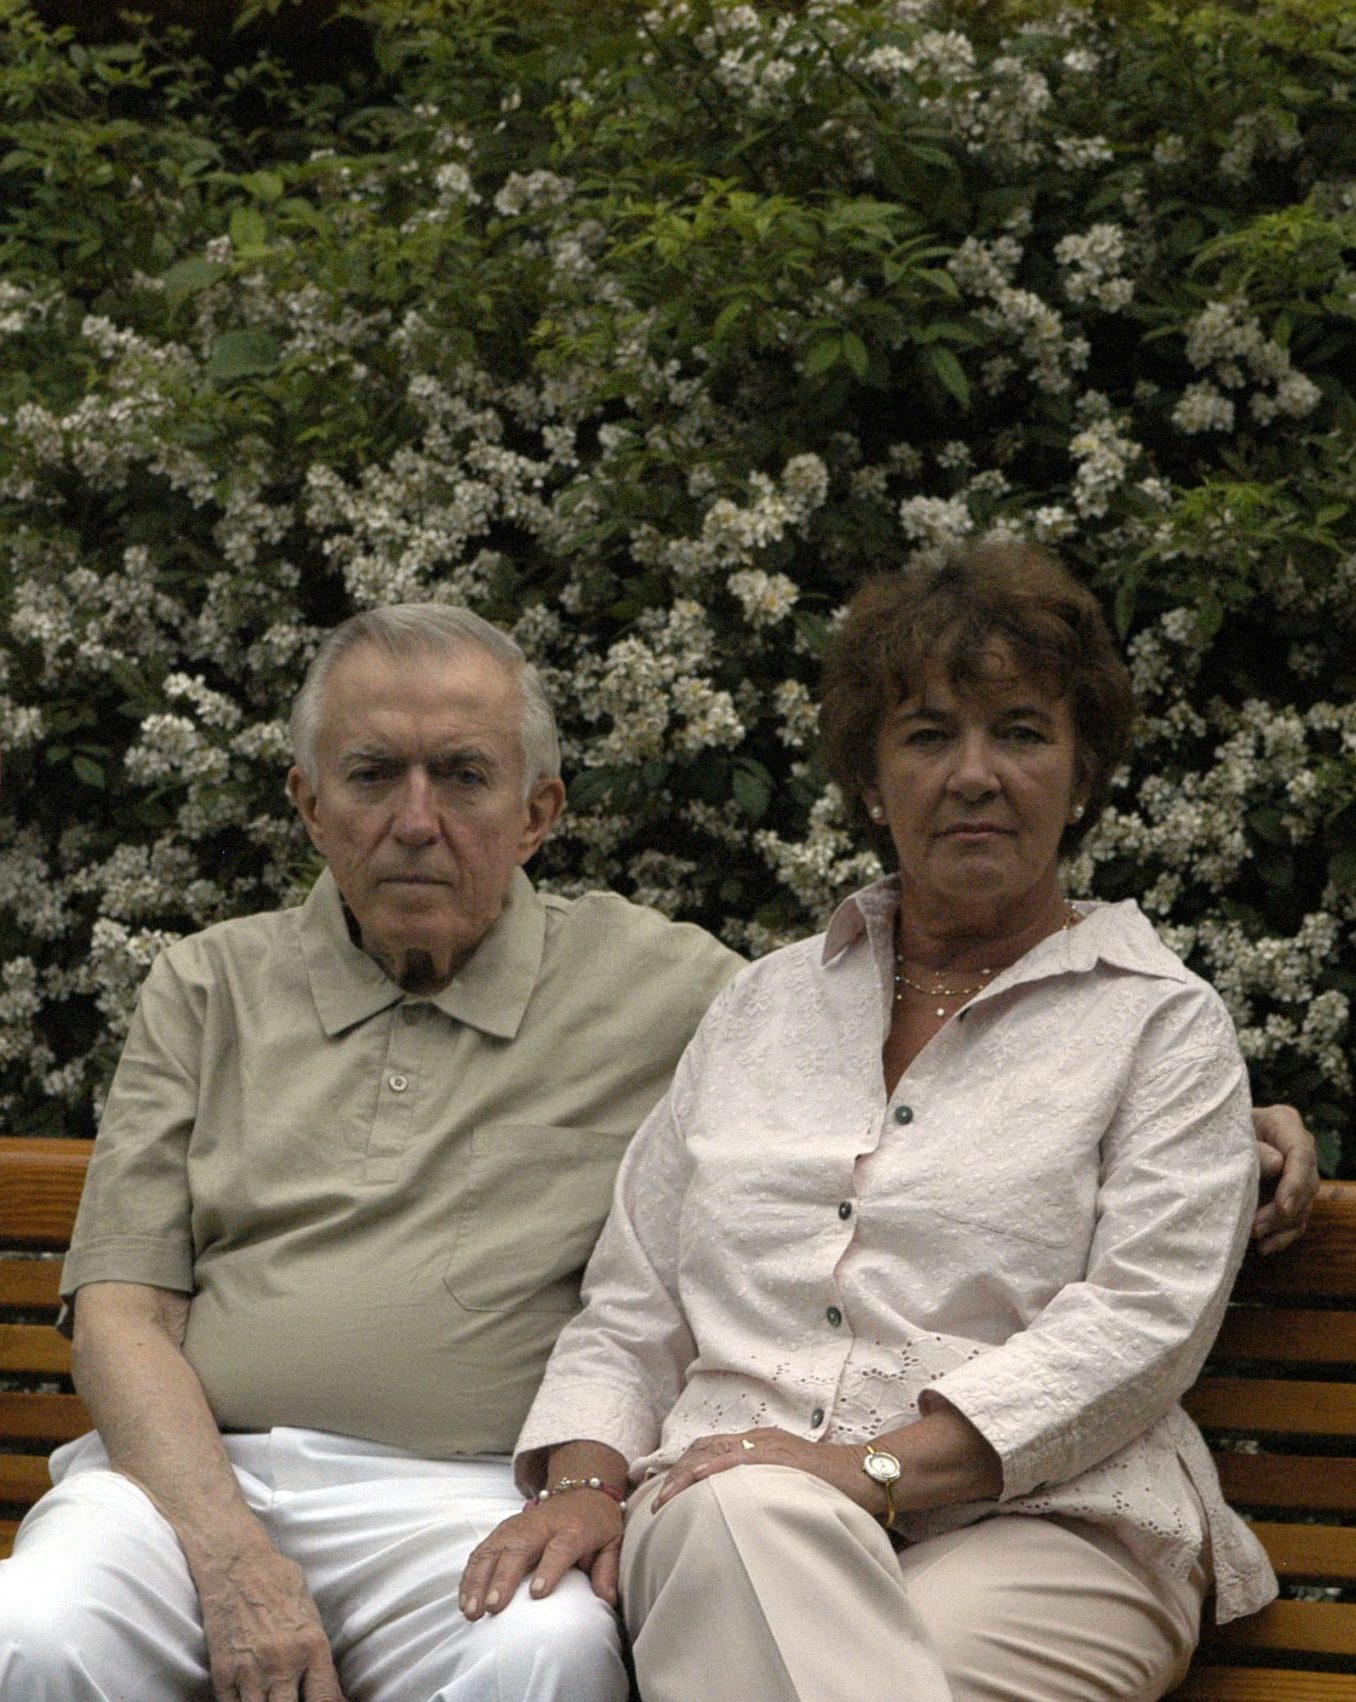 Gene and his wife, Adeline “Addy” Krizek, his most loyal supporter of Bread and Water for Africa®